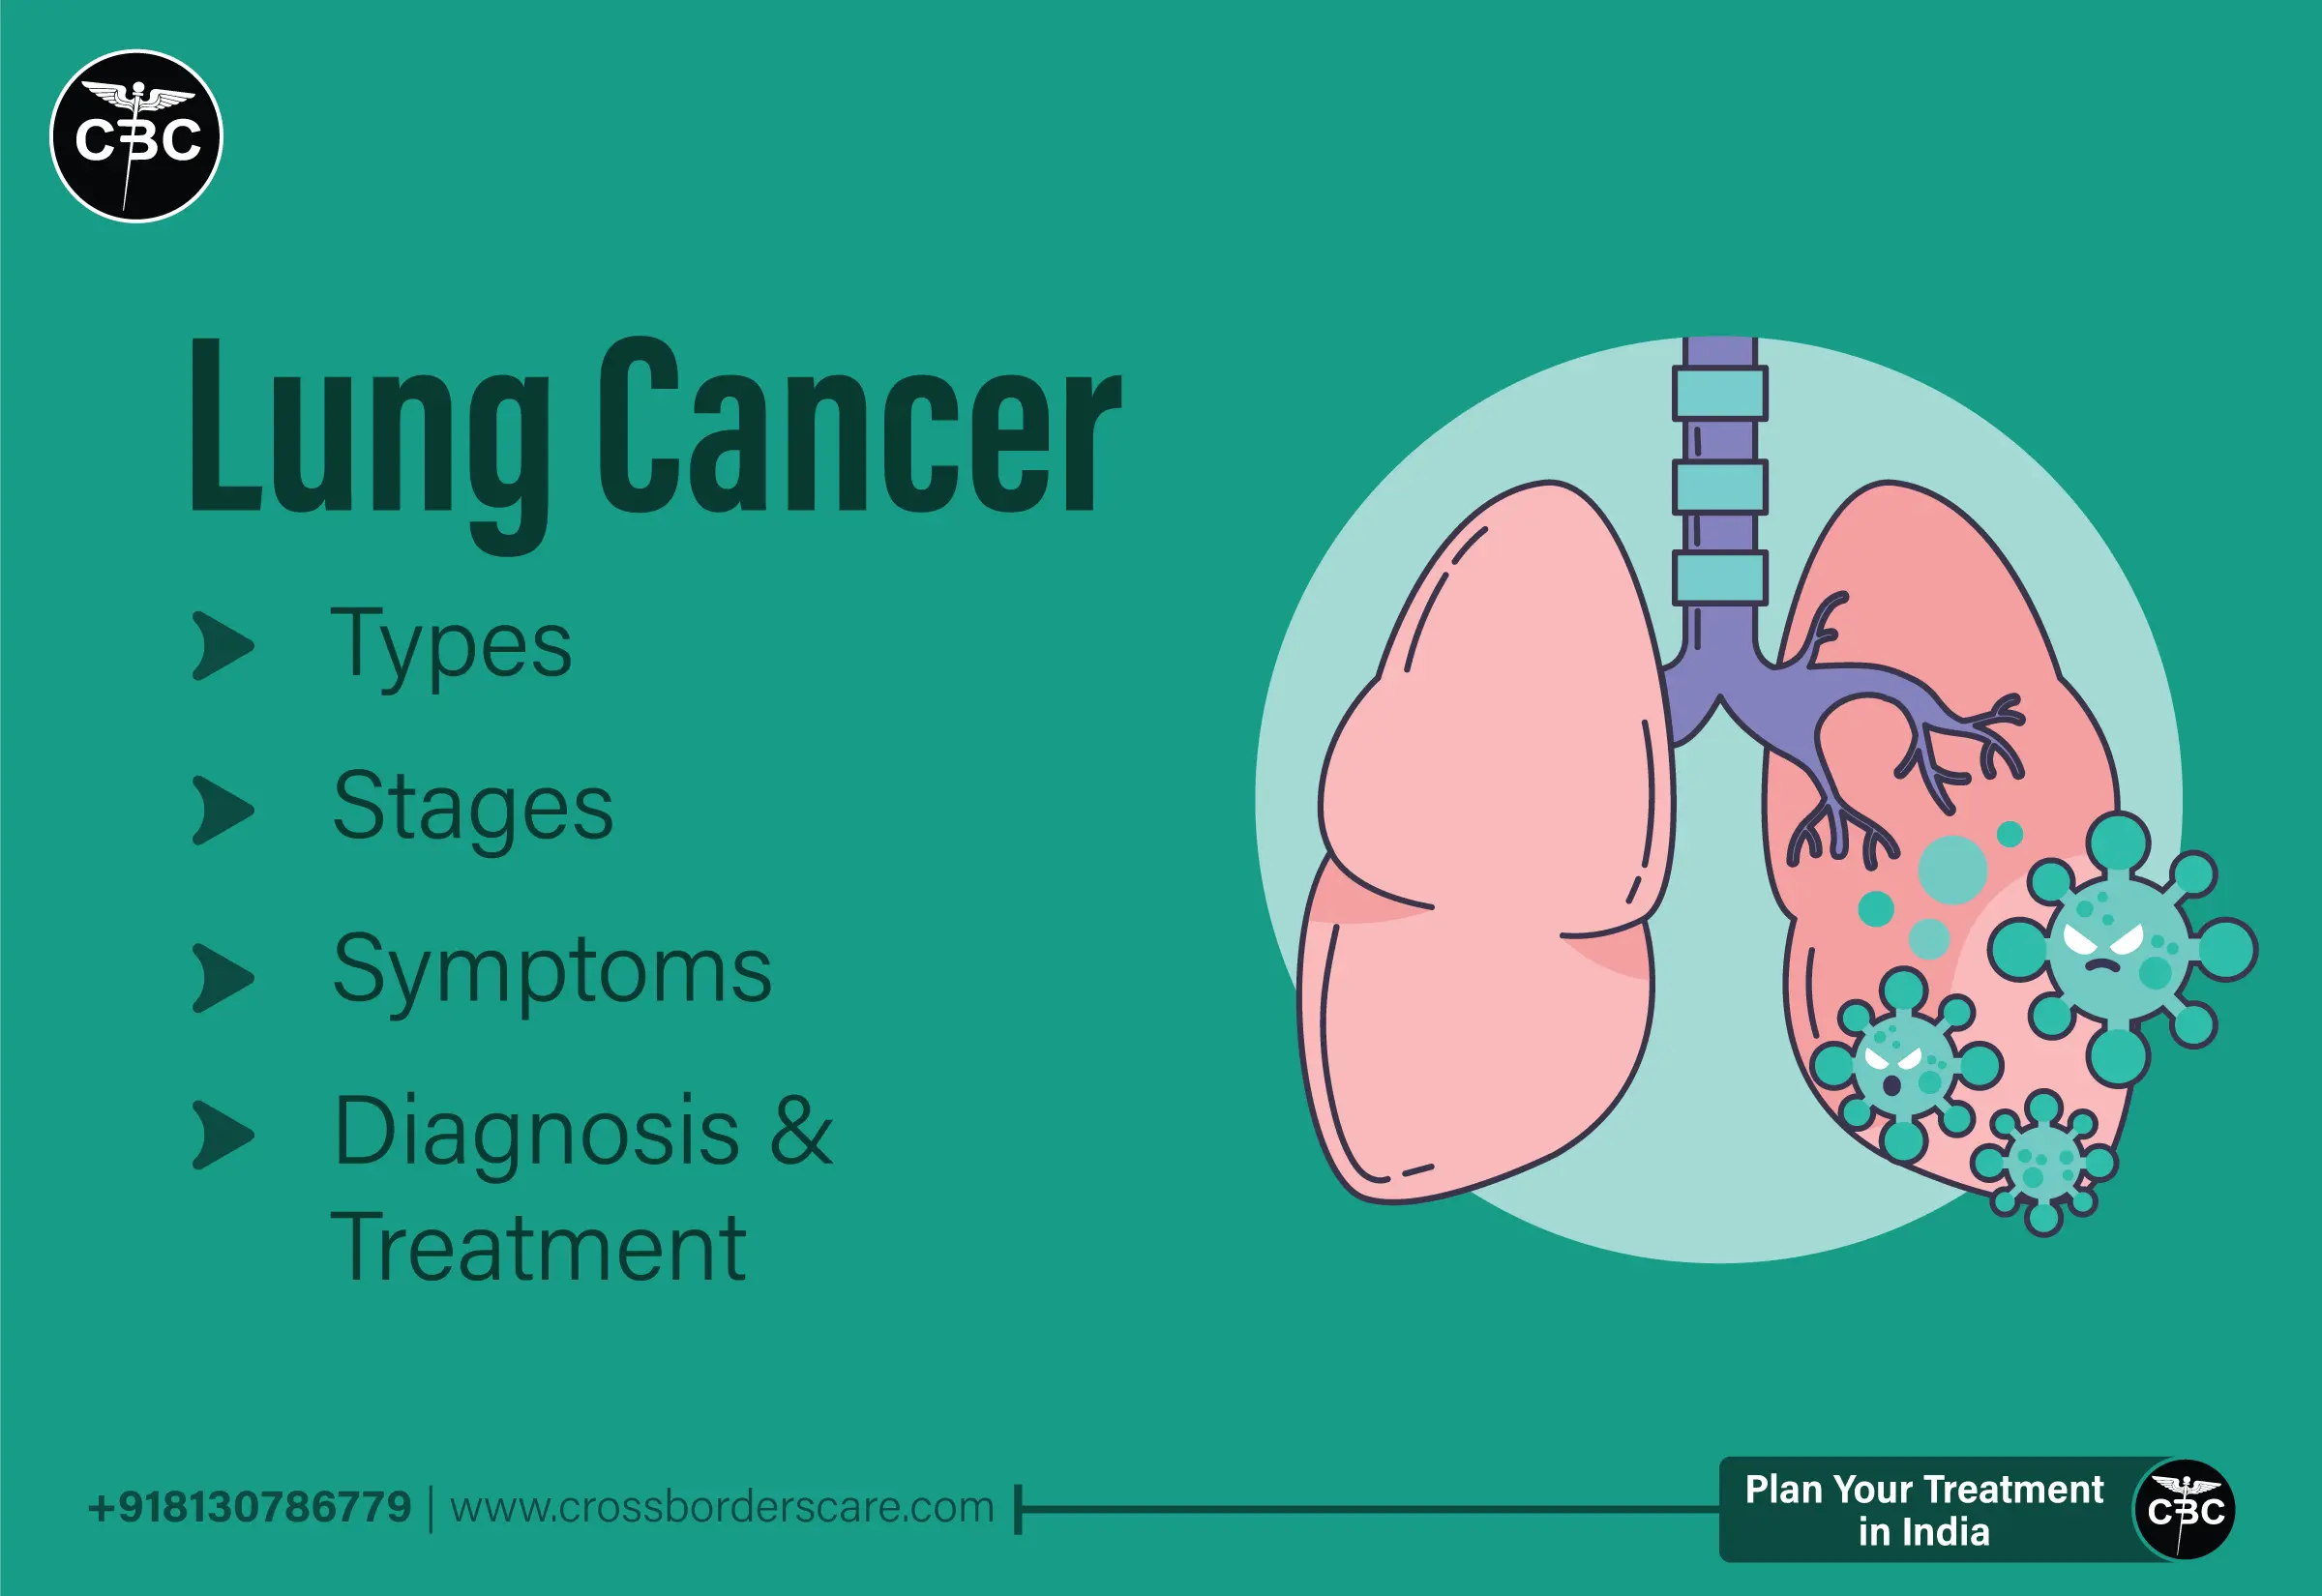 Lung Cancer - Types, Symptoms, Diagnosis and Treatment